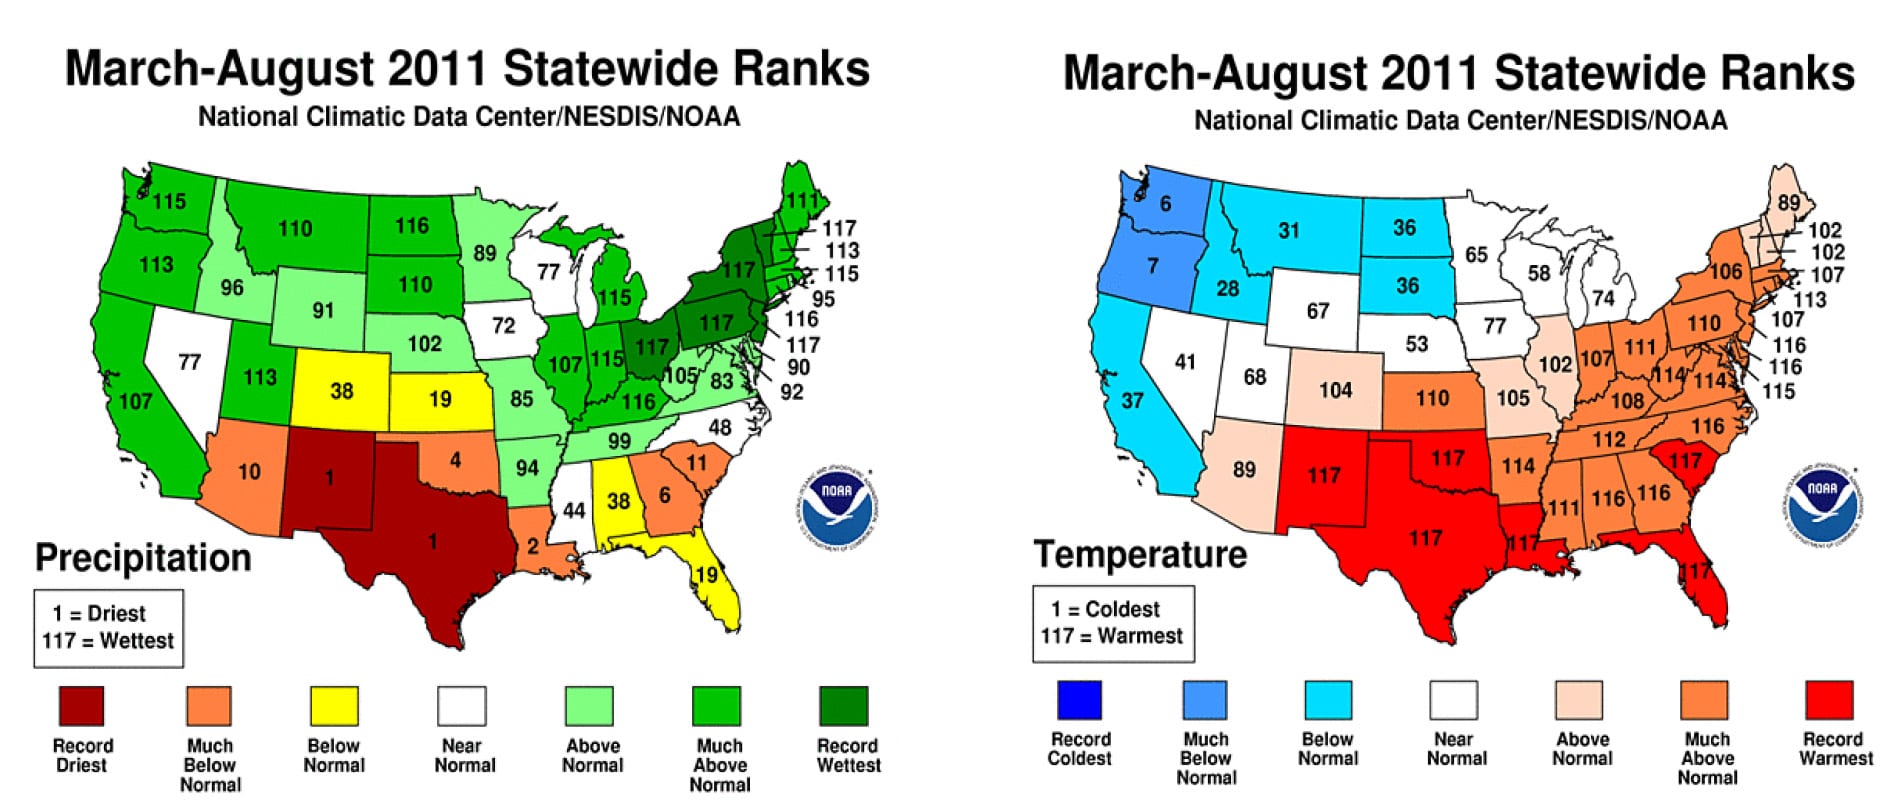 Figure showing state-wide ranks for average March-August 2012 precipitation and temperature. Source: NOAA.